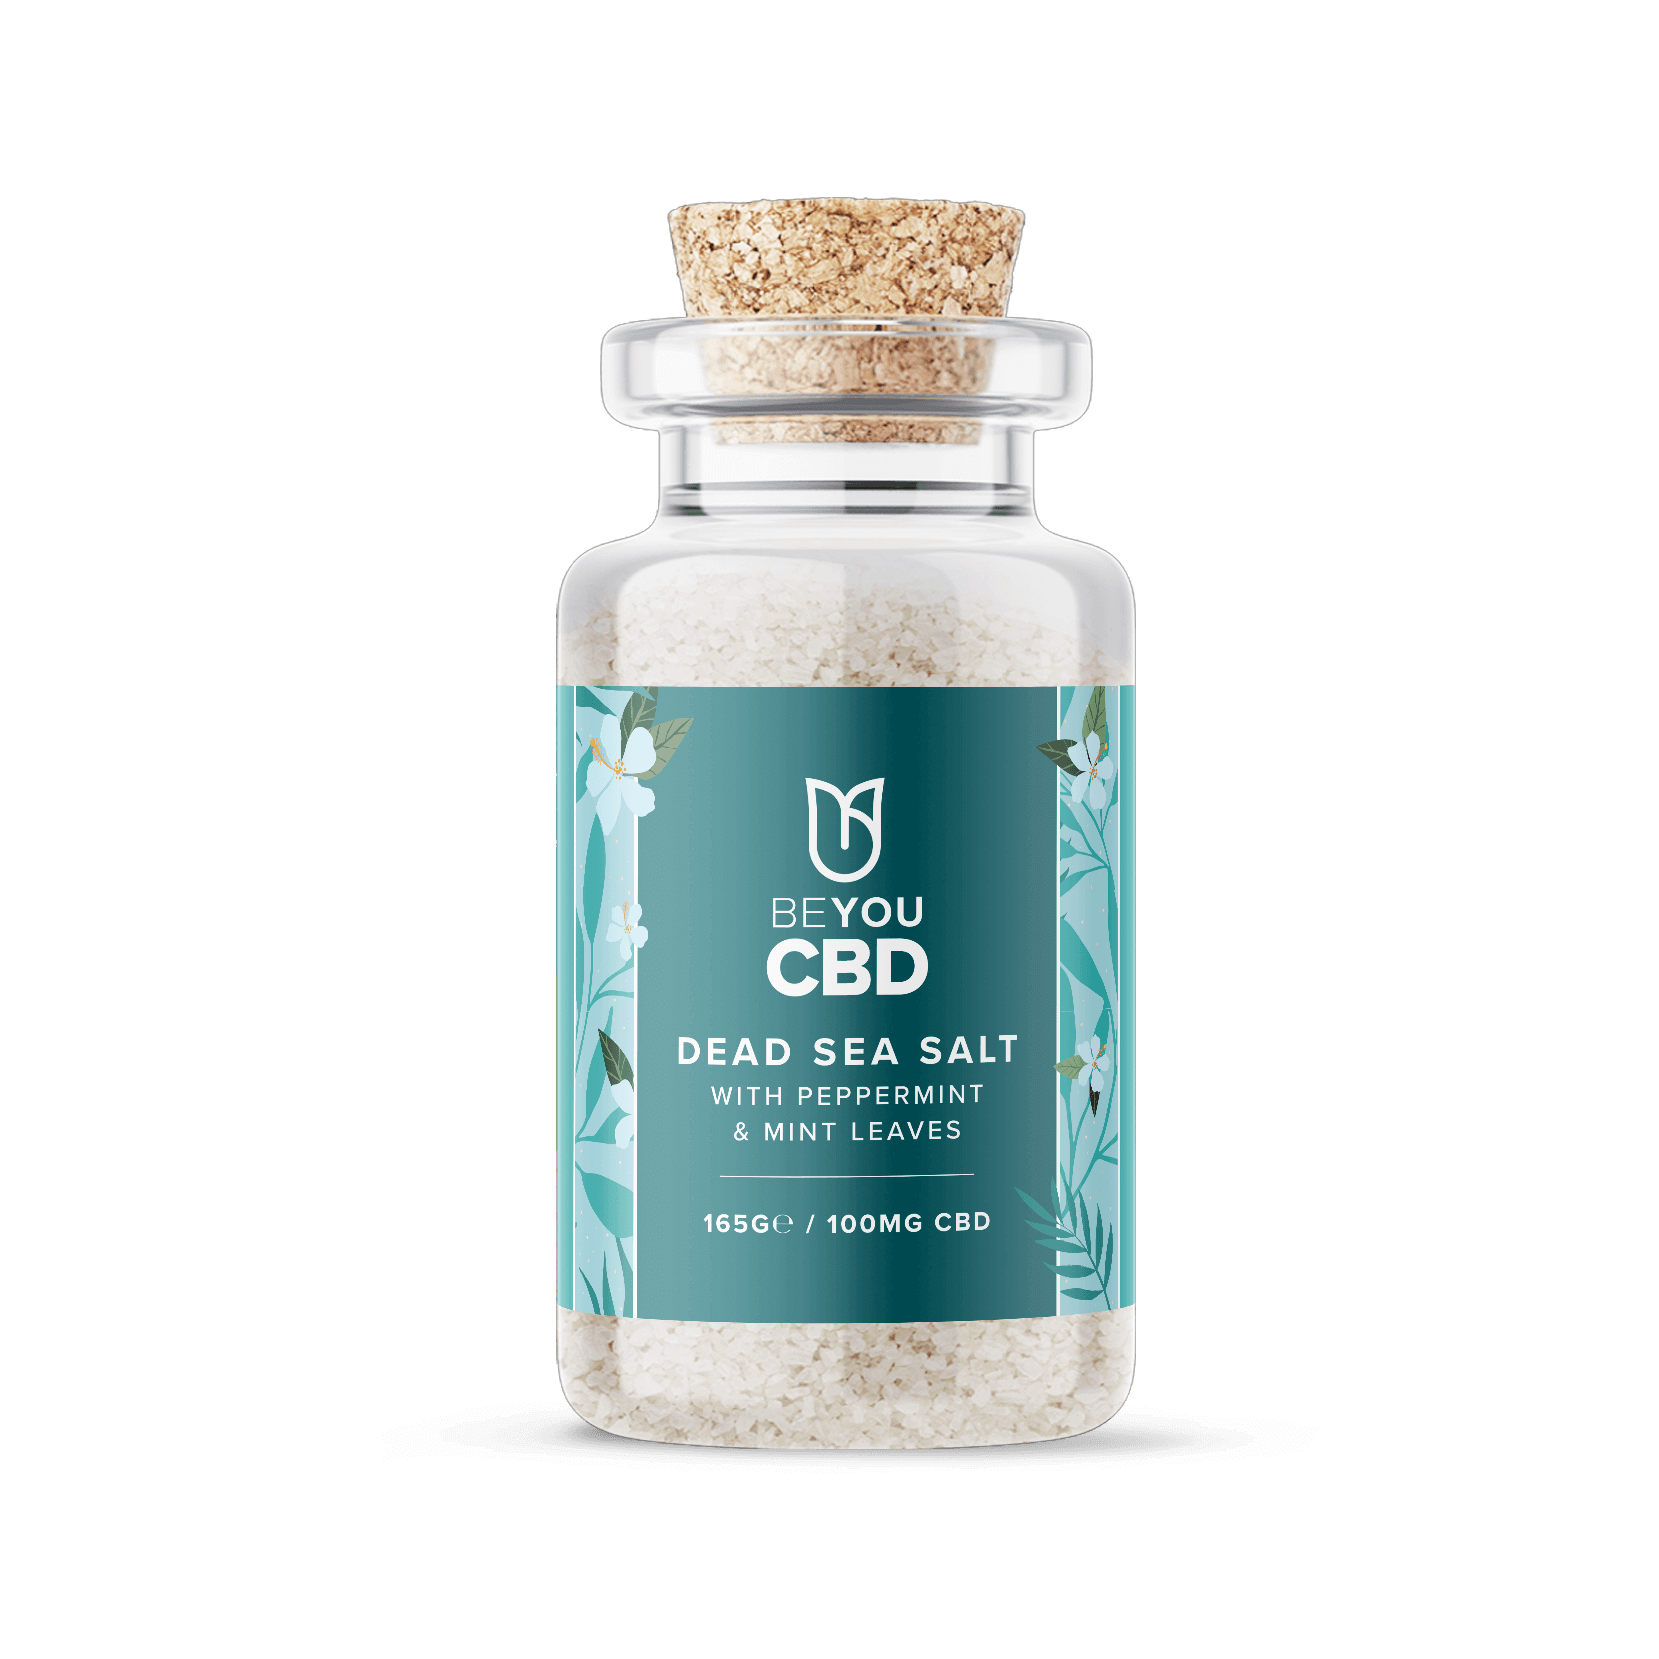 dead sea salt with high strength CBD featuring peppermint essential oil and mint leaves for ultimate relaxation